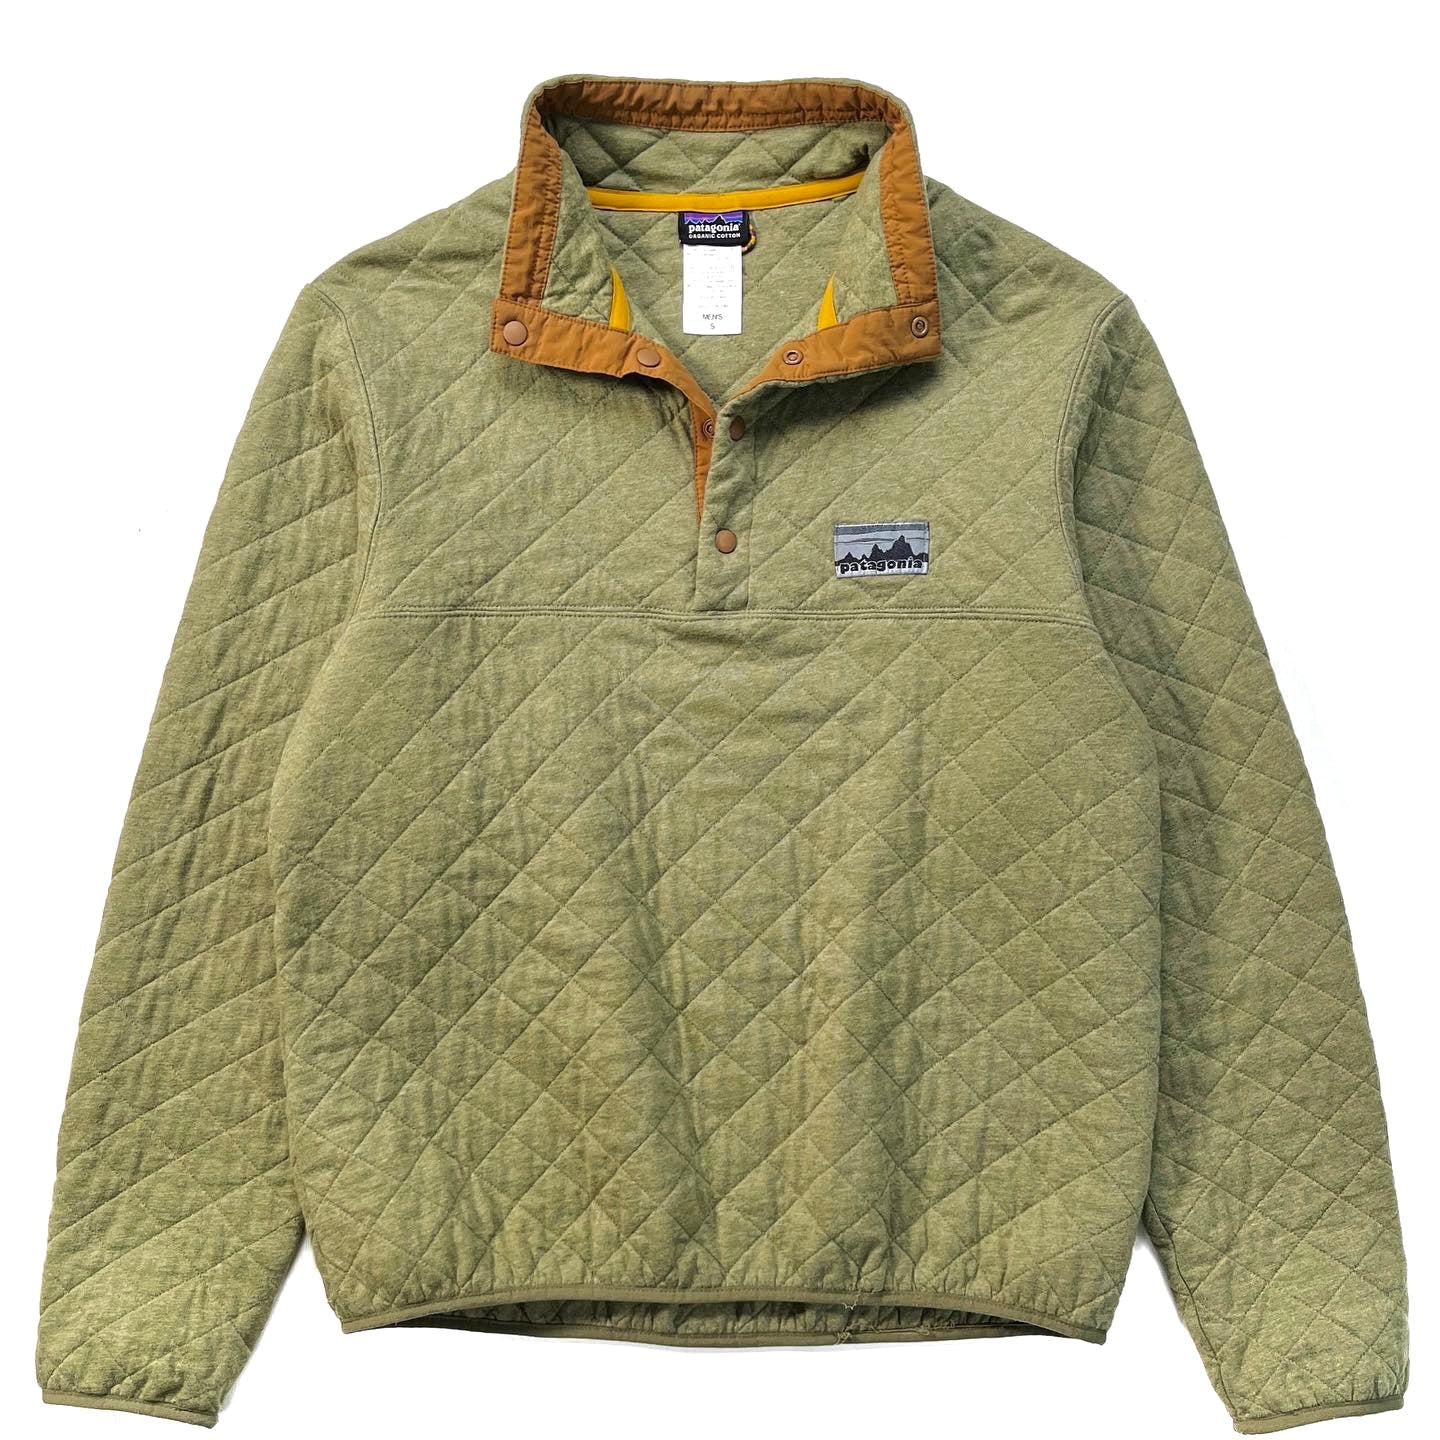 2014 Patagonia Legacy Diamond Quilt Snap-T, Fatigue Green (S)